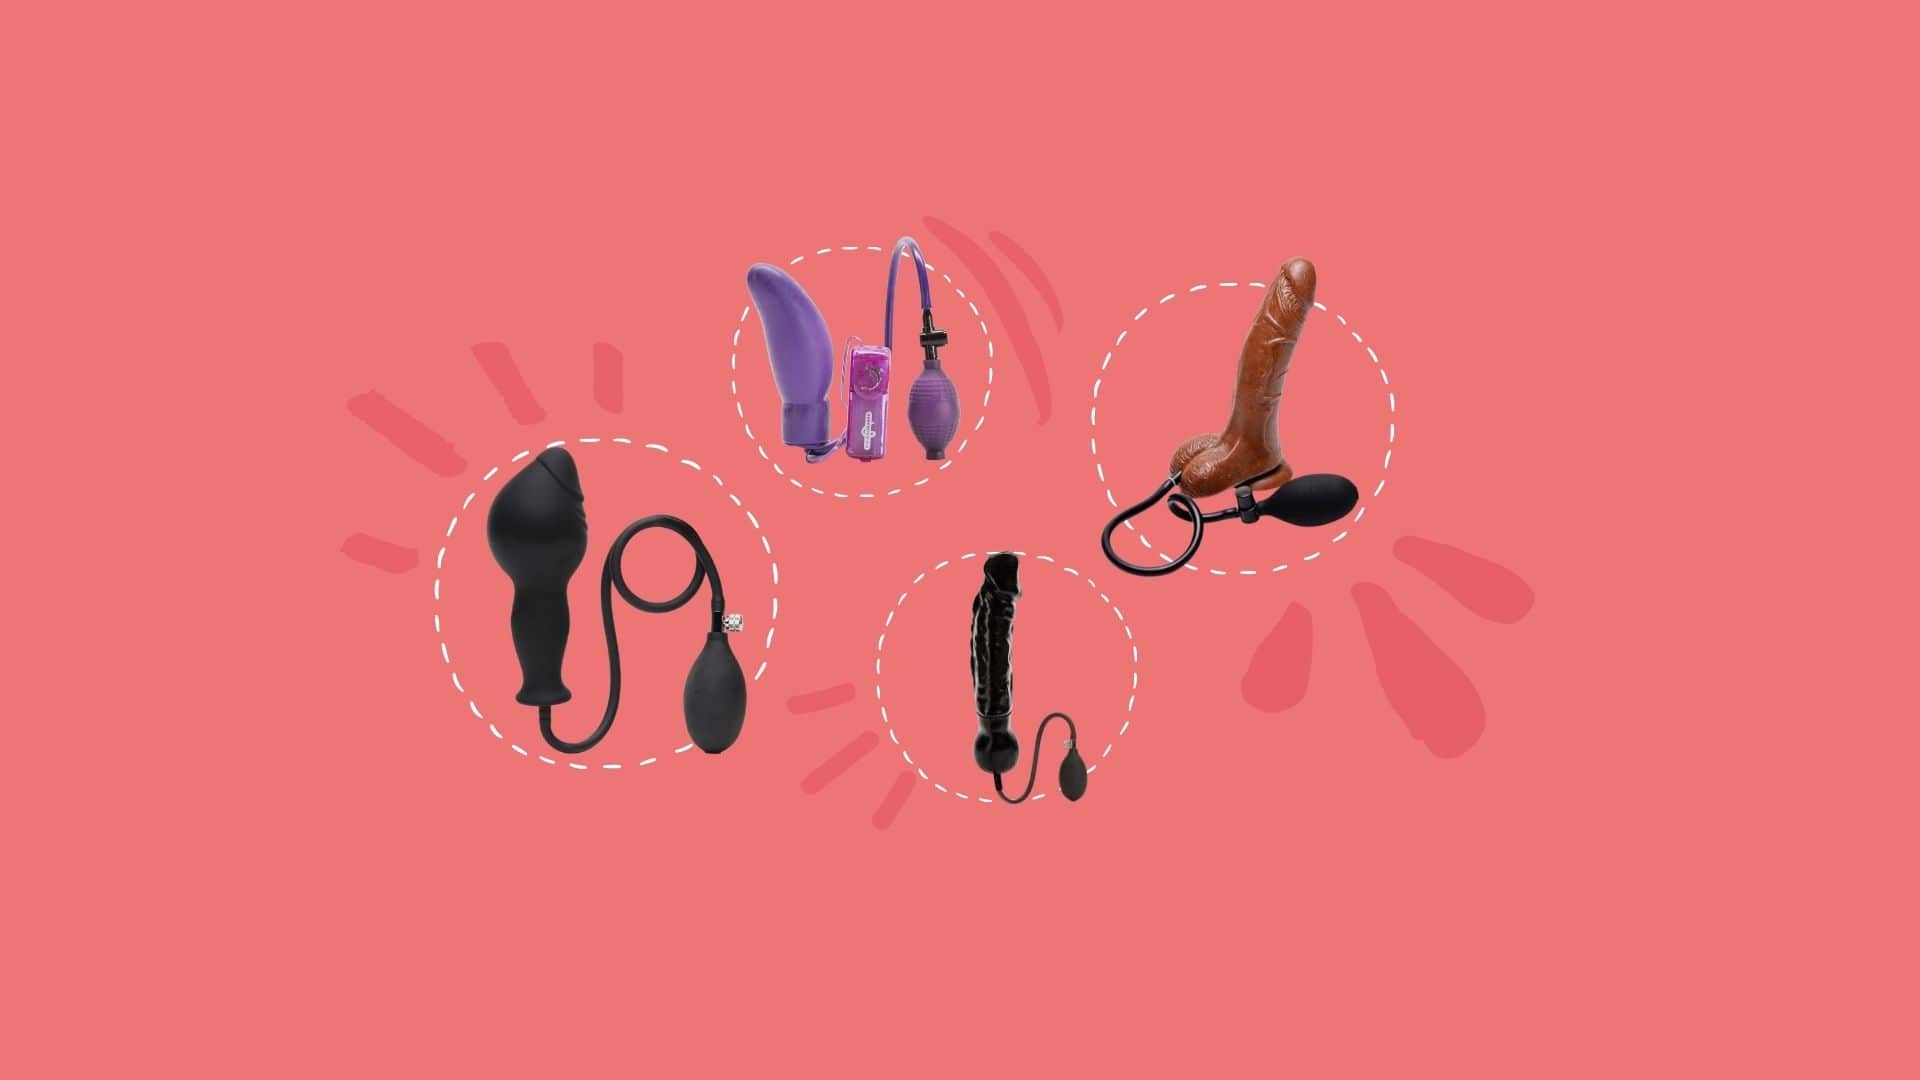 8 Best Inflatable Dildos and Vibrators to Expand Your Excitement